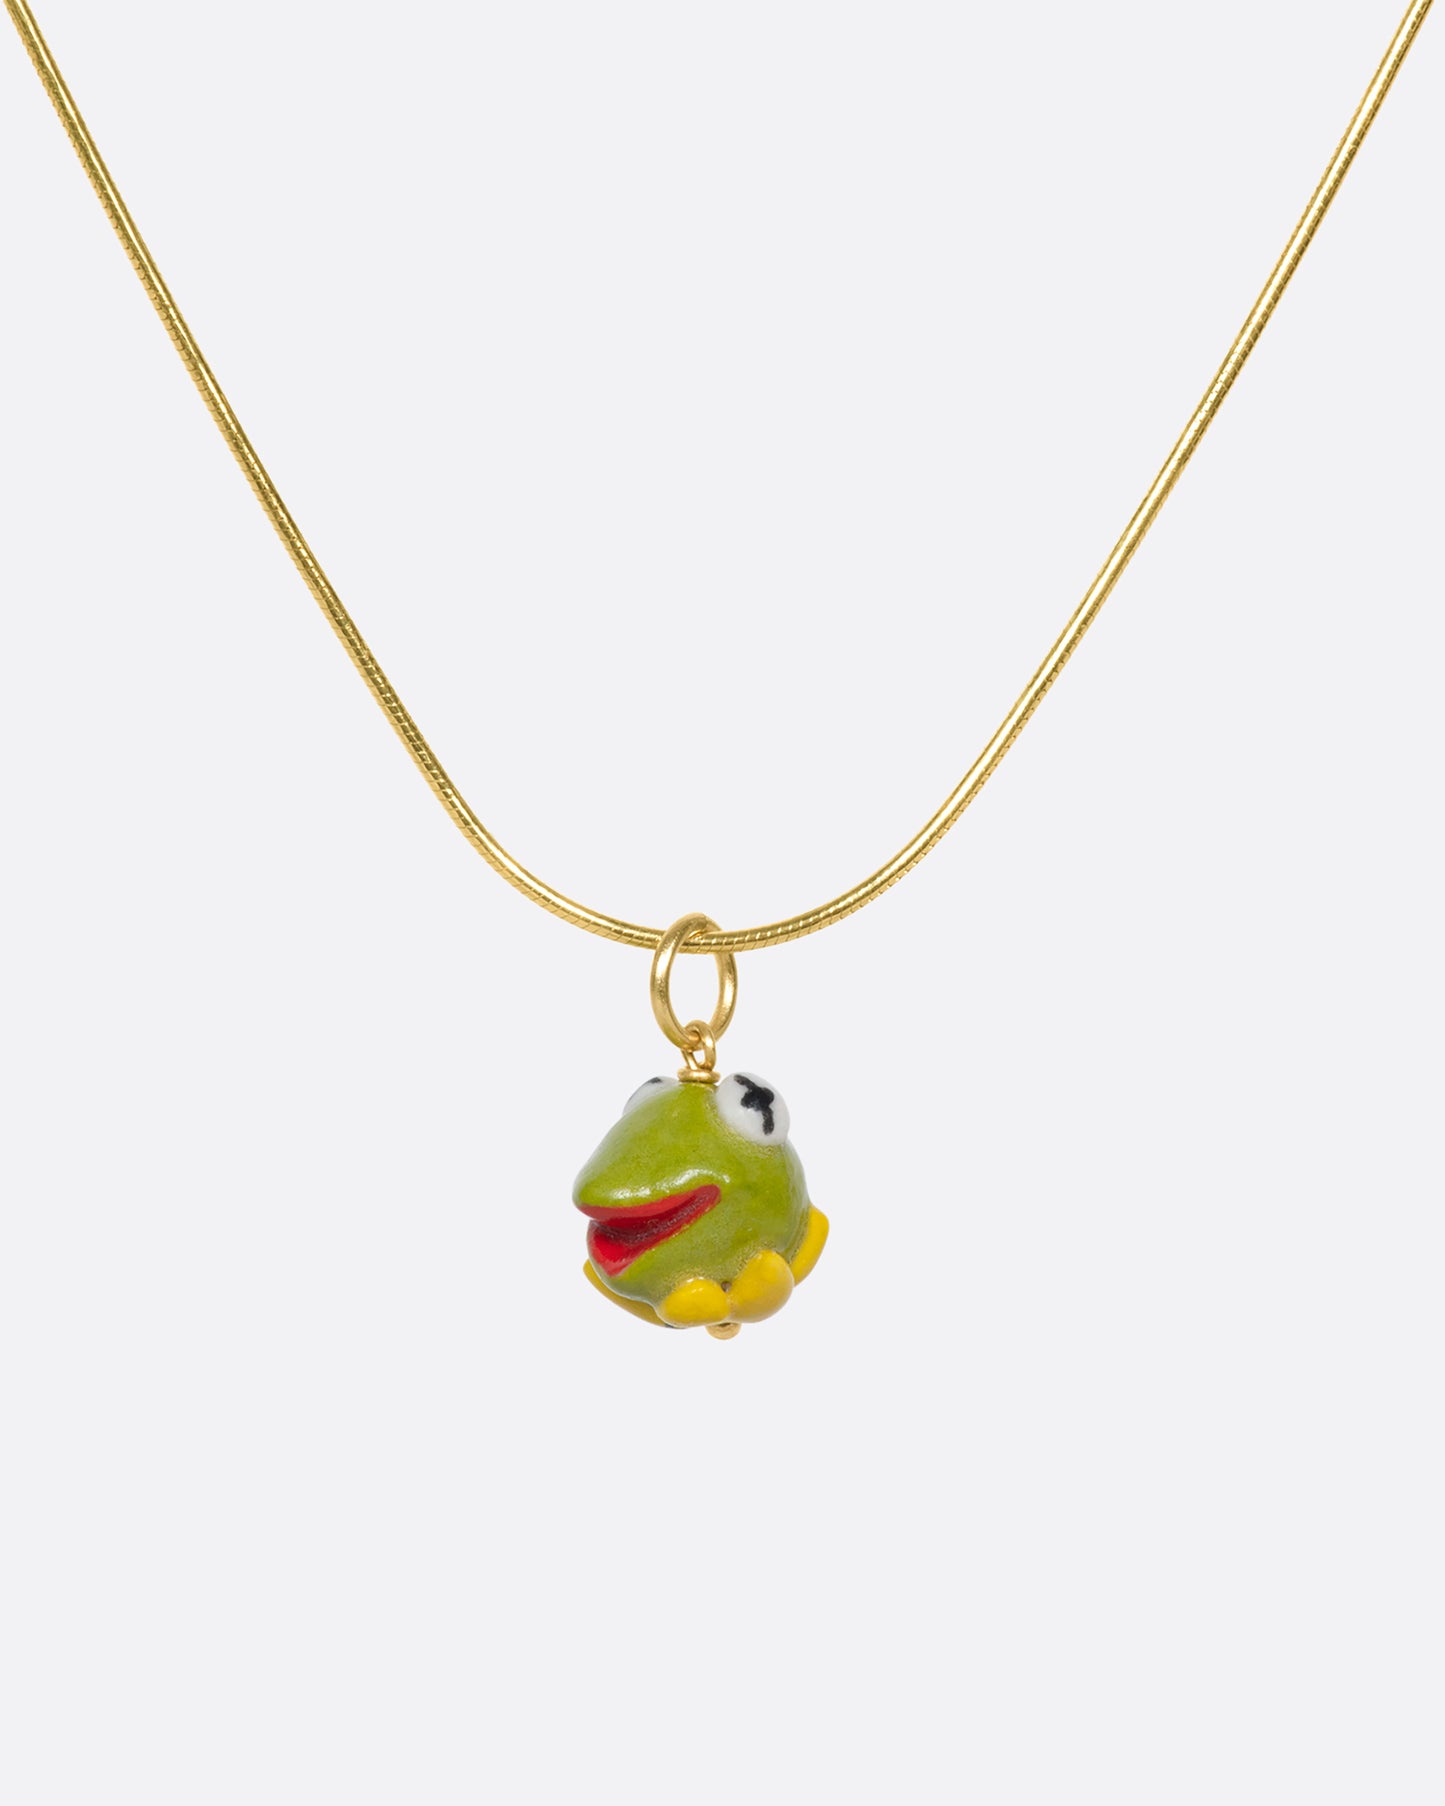 A handmade and painted porcelain Kermit the Frog charm with a gold bail.